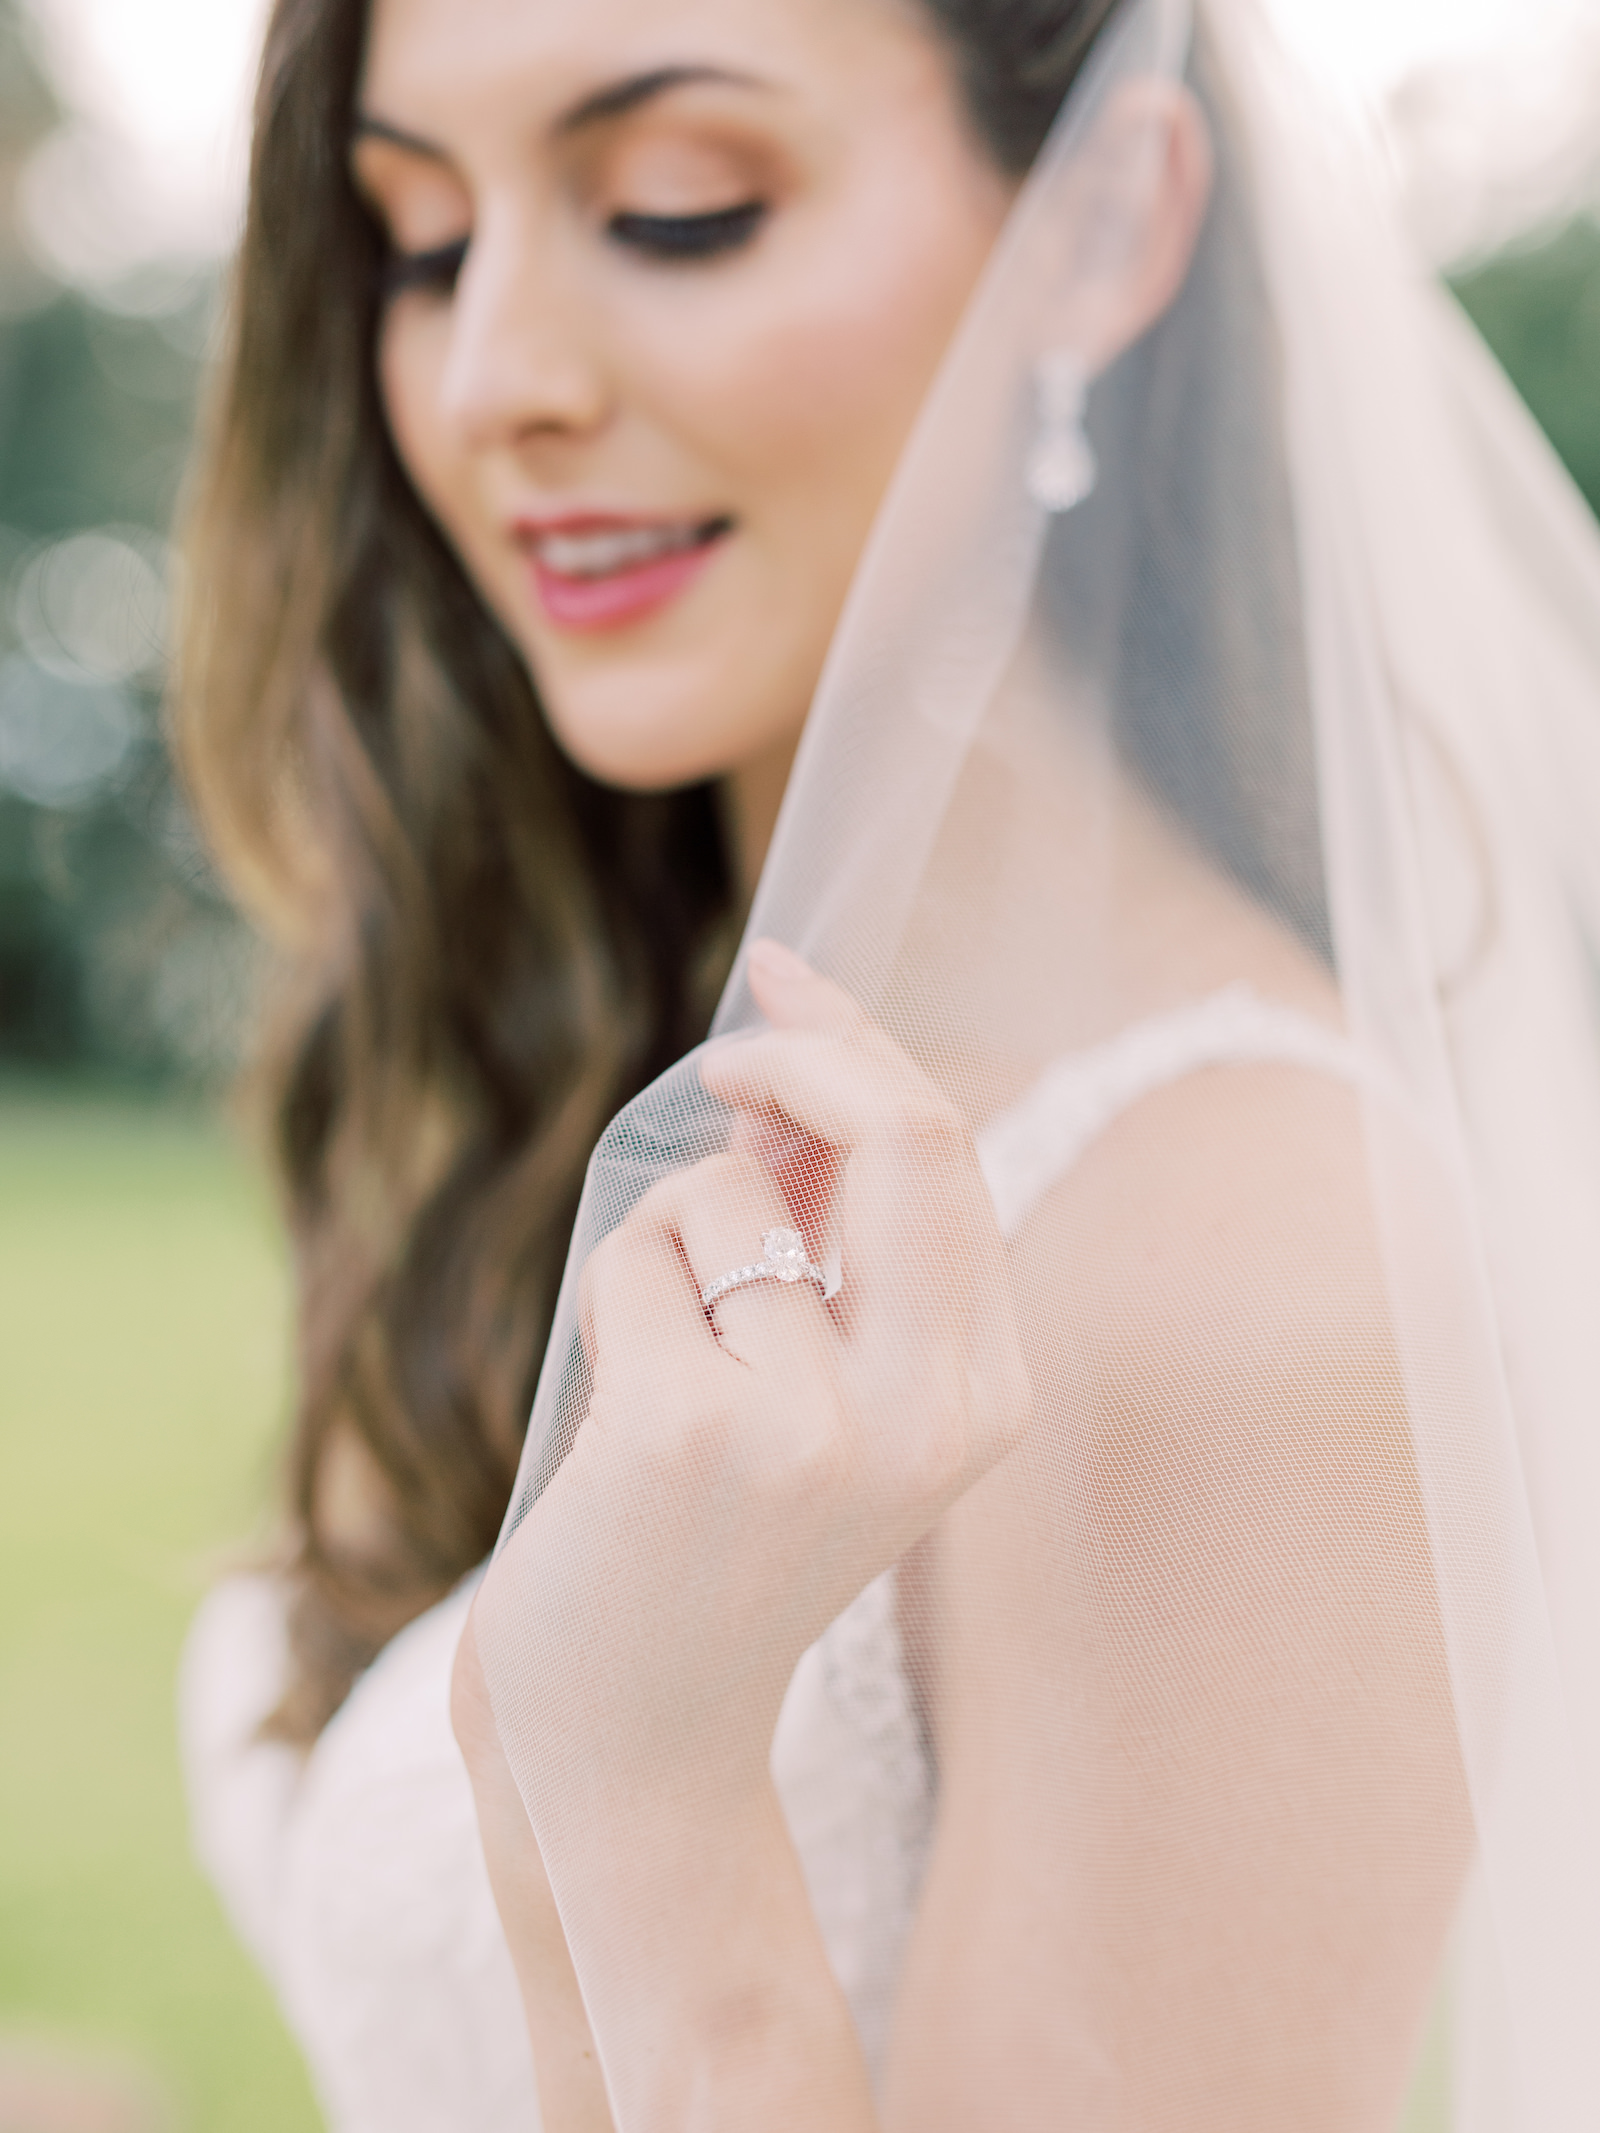 Bridal Portrait | Wedding Photo Veil Shot | Natural Bridal Makeup for the Bride | Oval Tiffany Solitaire Diamond Engagement Ring with Channel Set Diamond Band